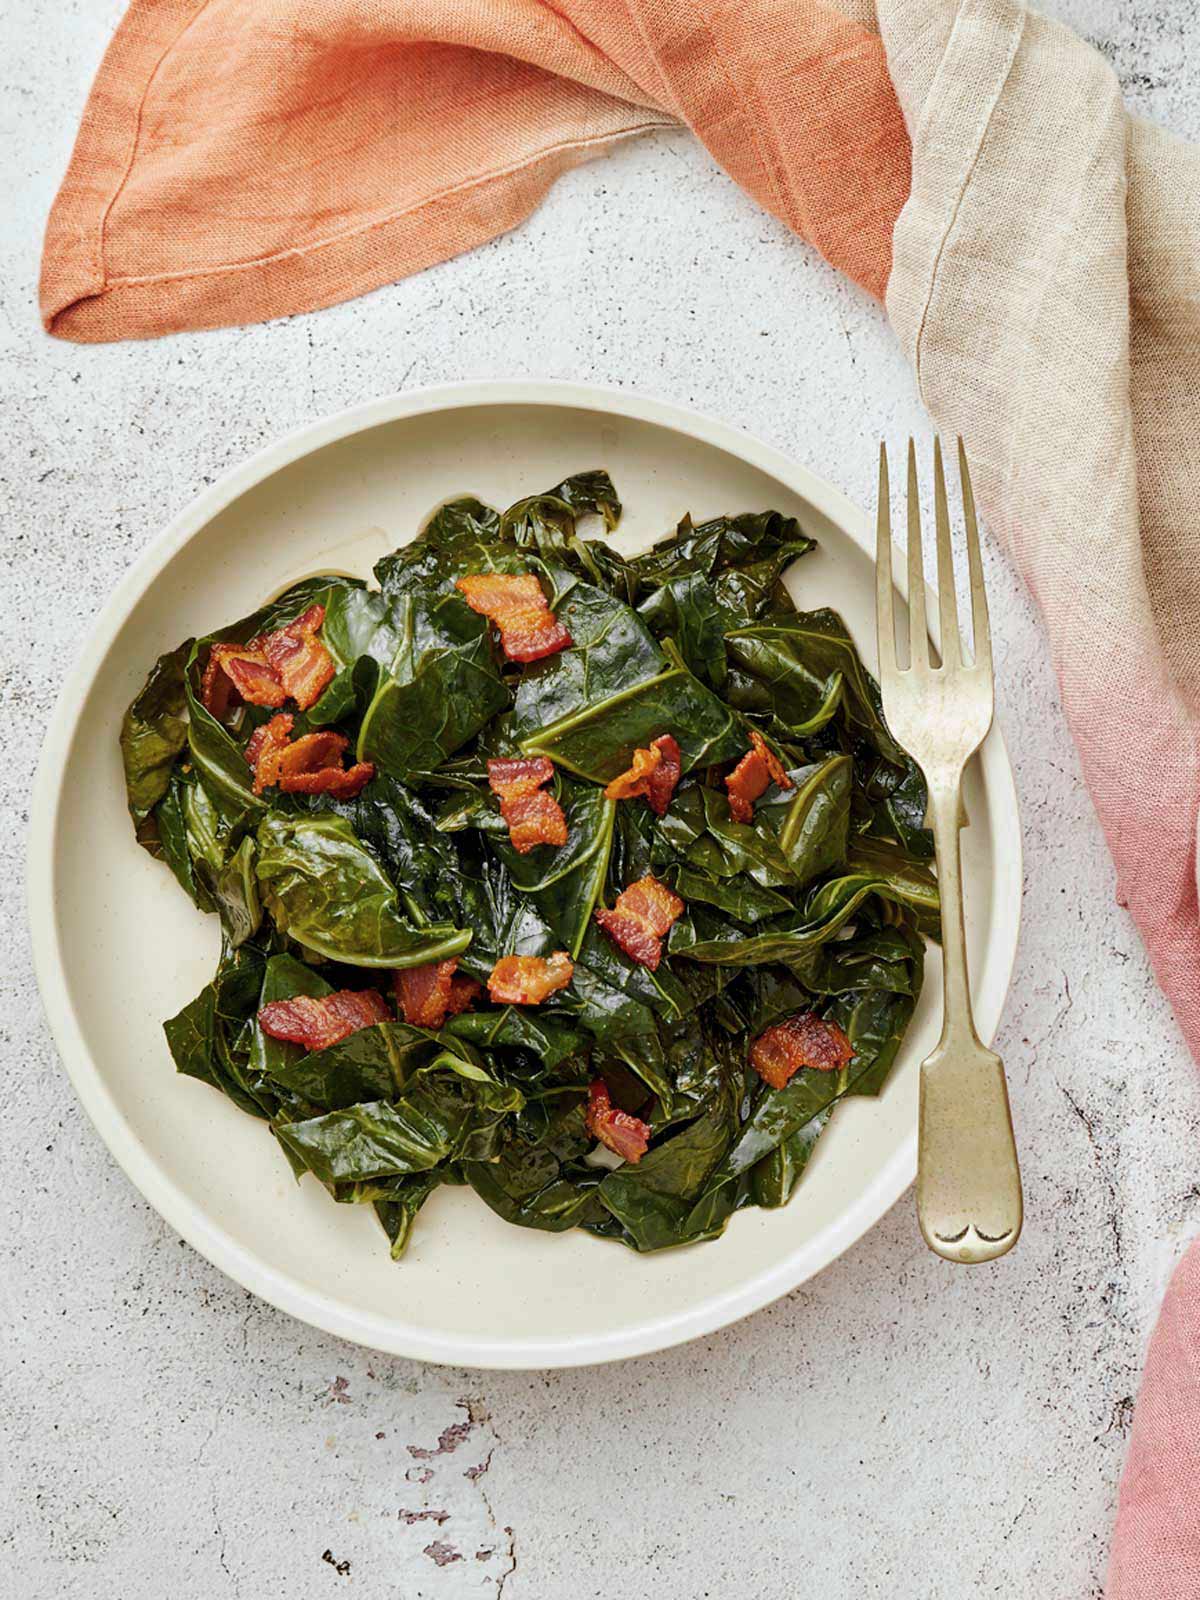 A plate of collard greens with bacon on the table.